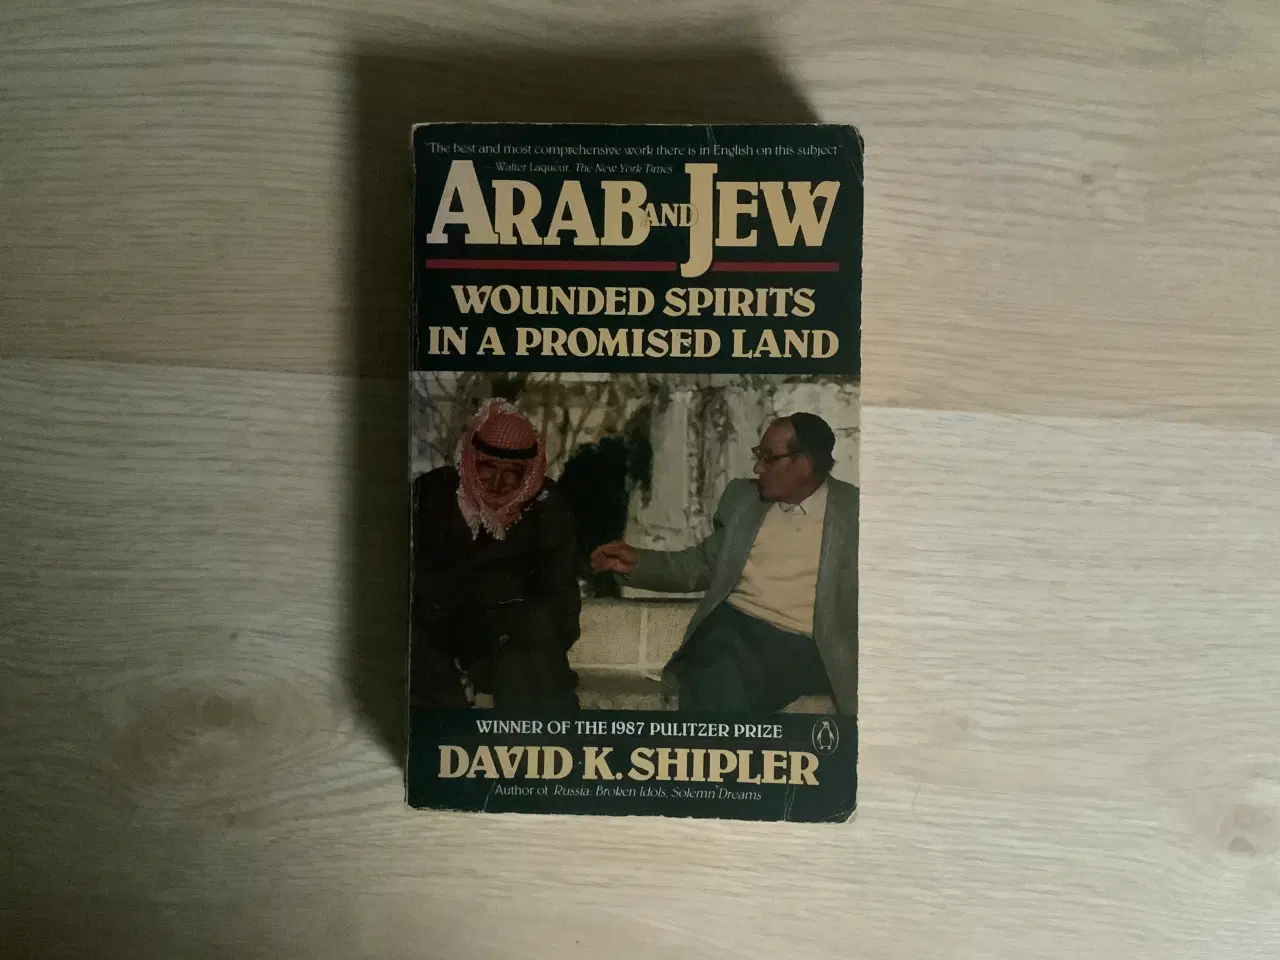 Billede 1 - Arab and Jew: Wounded Spirits in a Promised Land